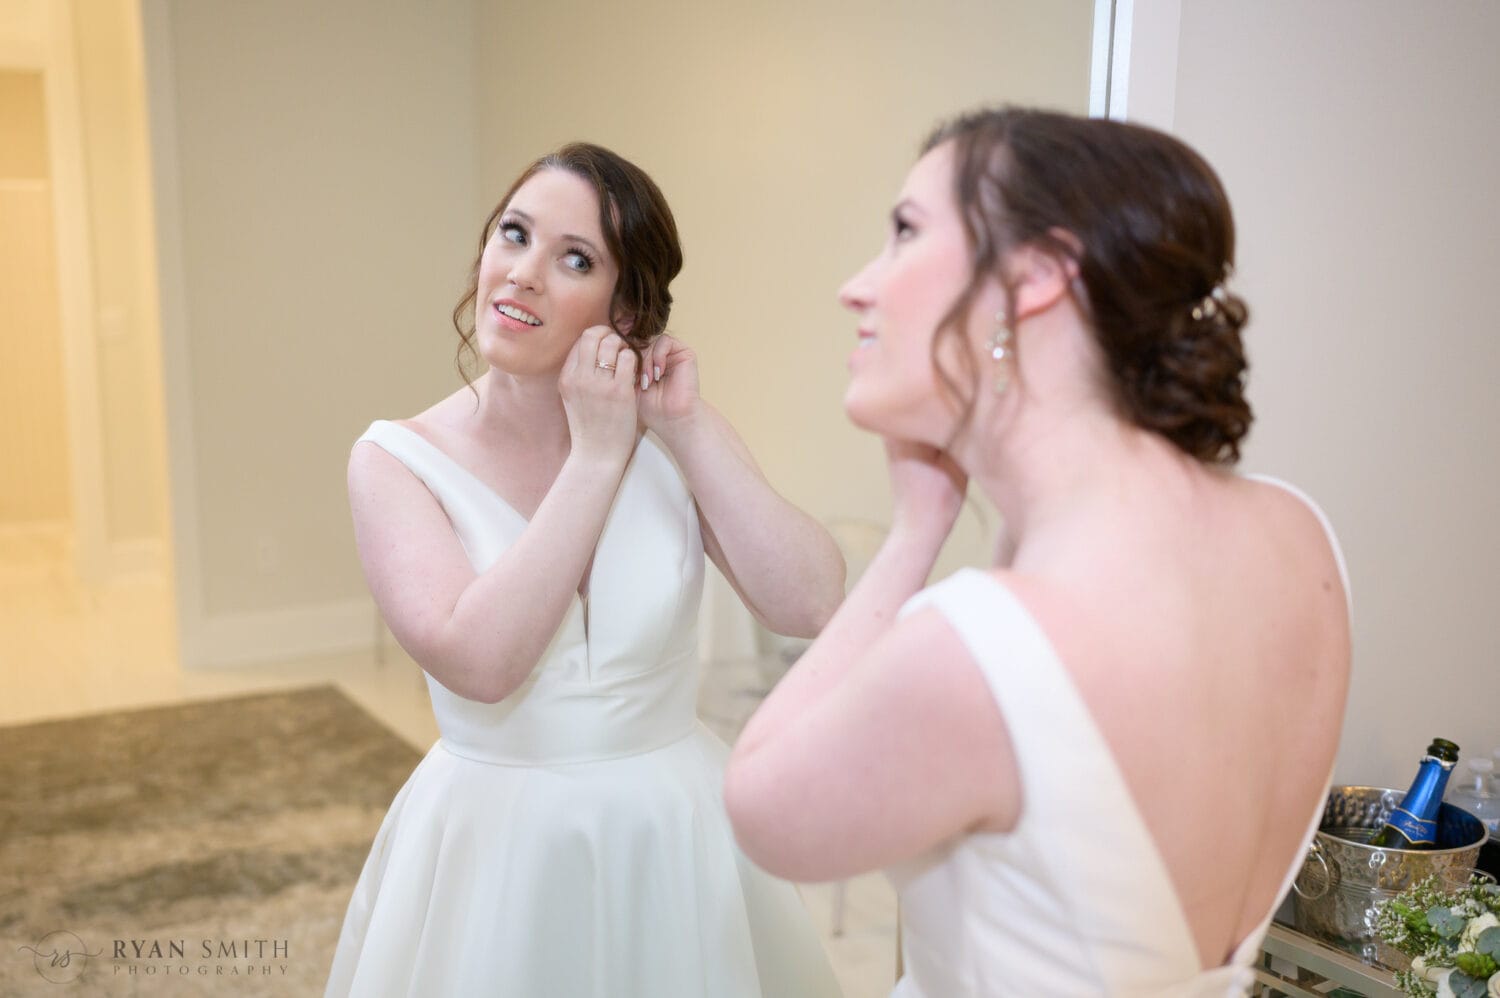 Bride putting earrings on in mirror - 21 Main Events at North Beach